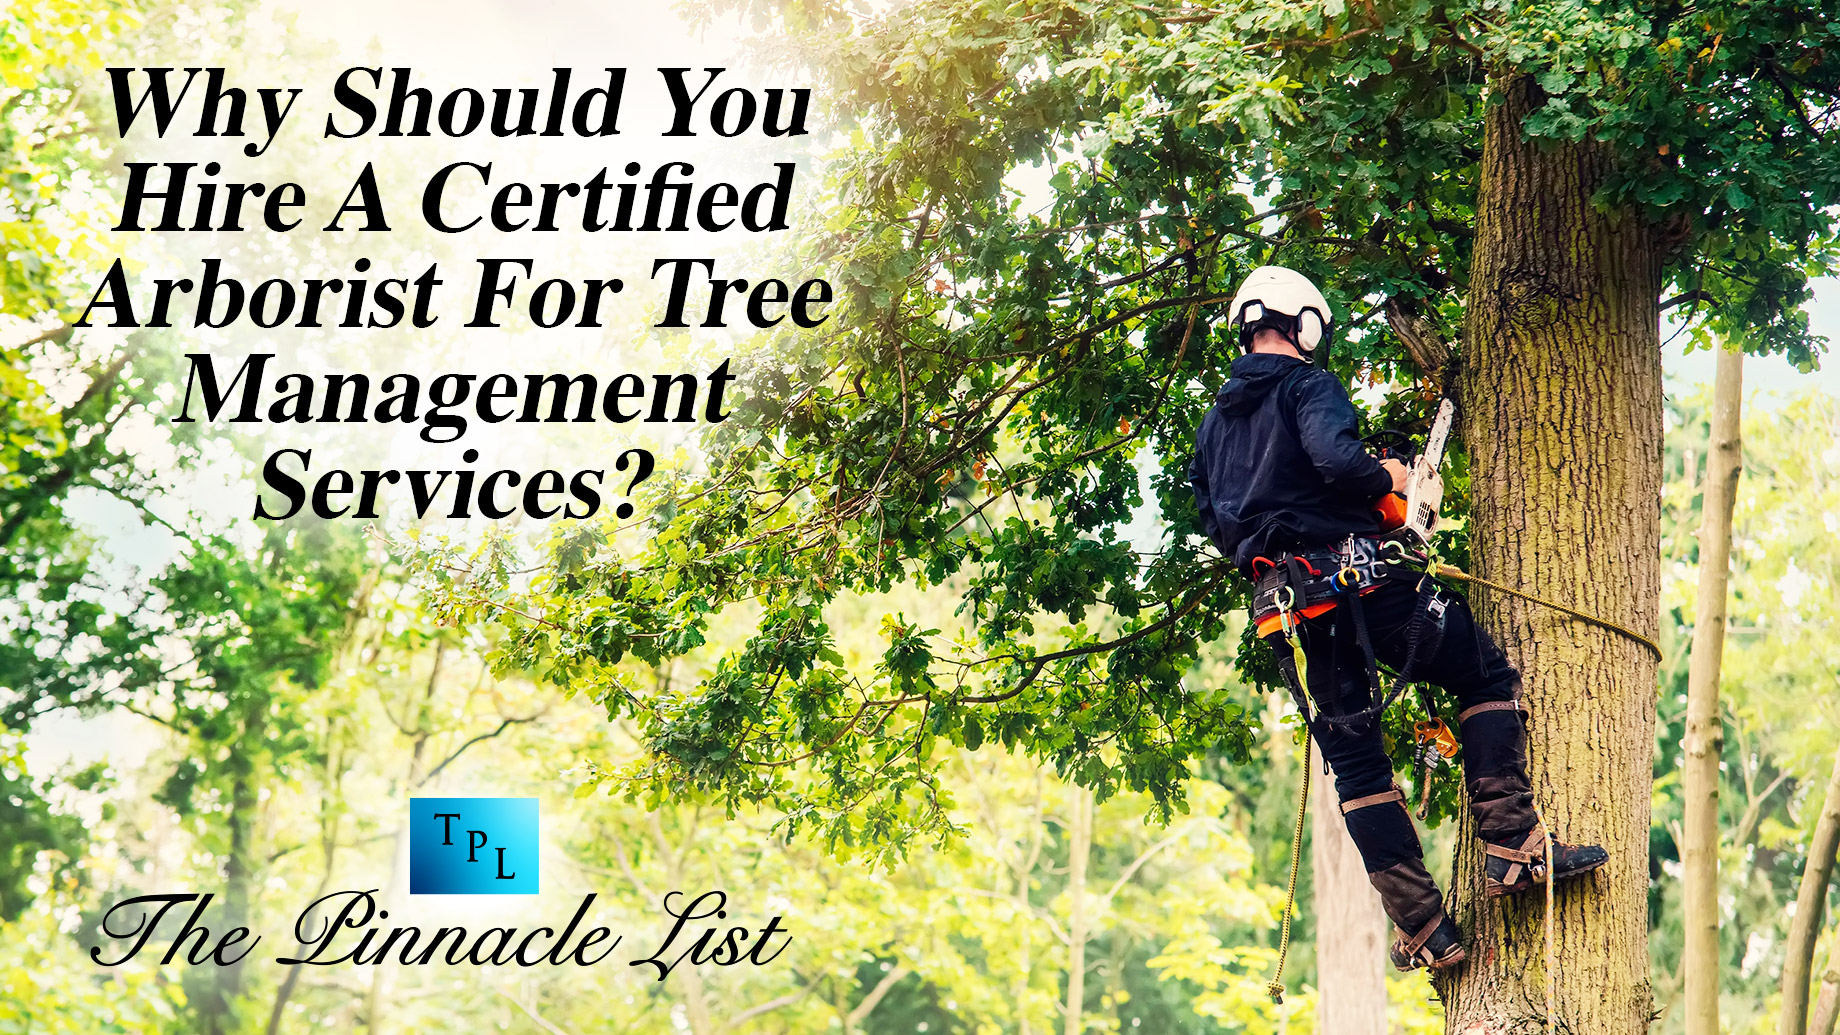 Why Should You Hire A Certified Arborist For Tree Management Services?